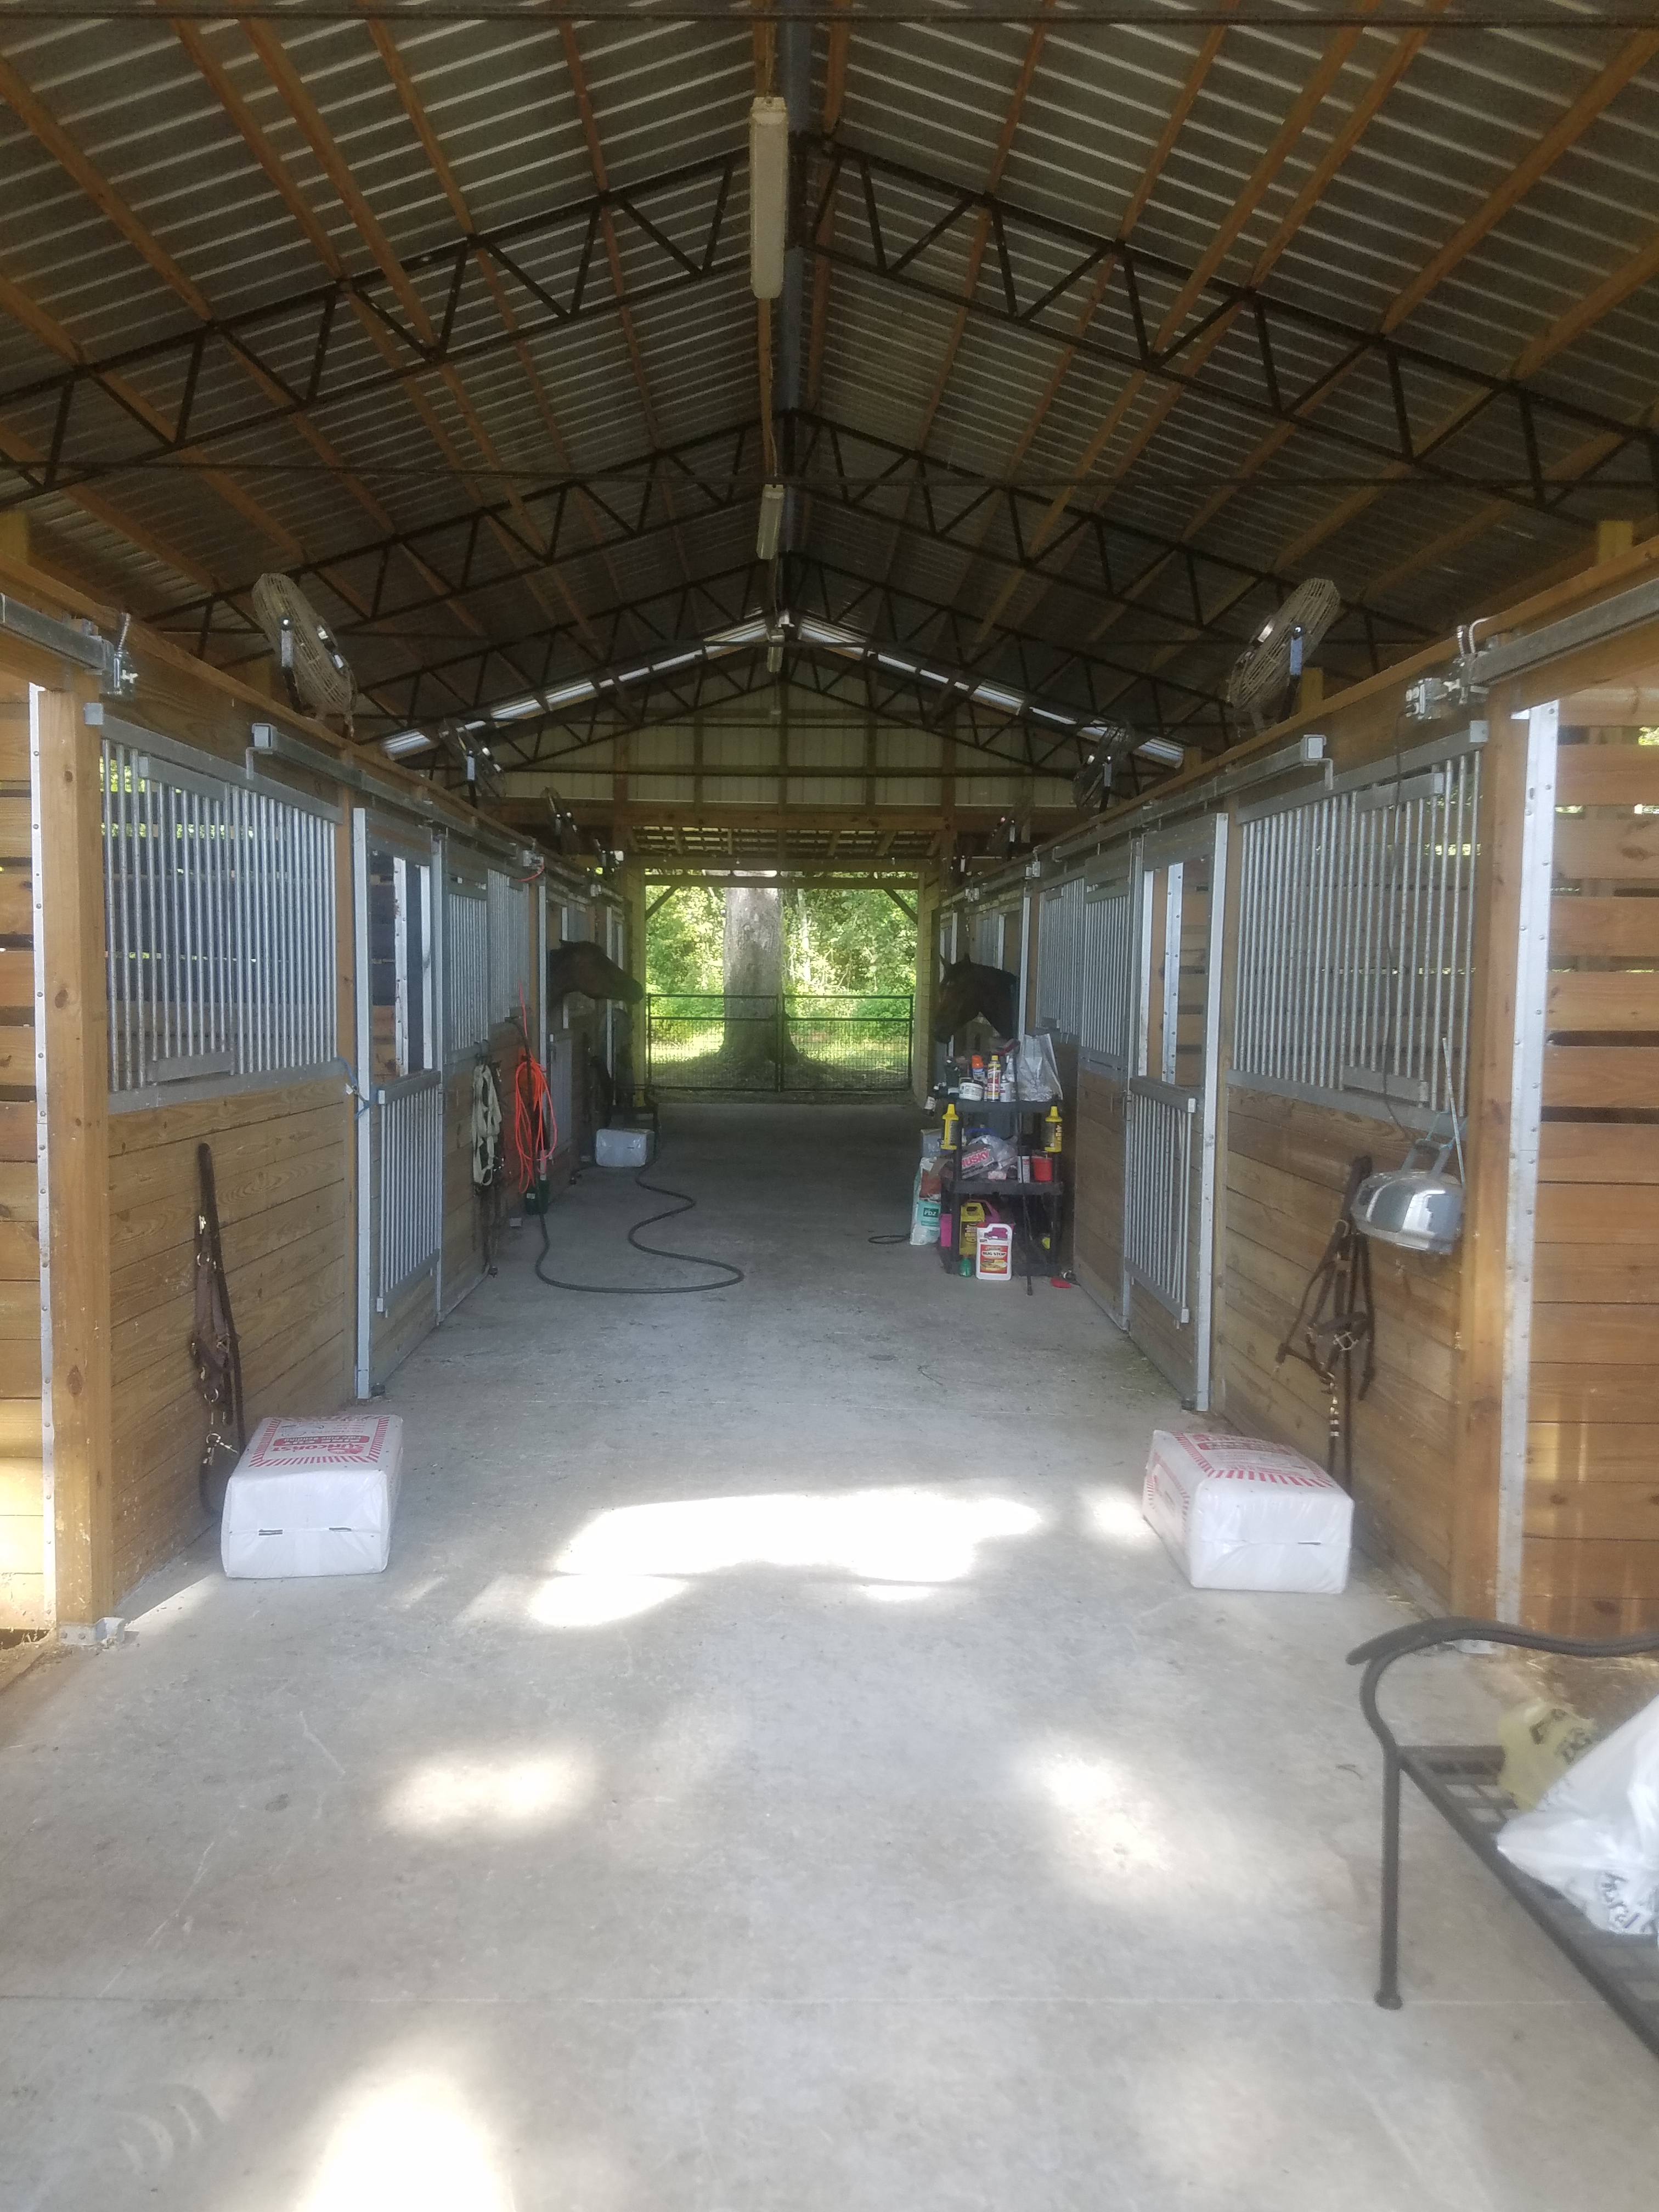 premier horse boarding facility located in the heart of Northwest Ocala. Just minutes from the World Equestrian Center and HITS!